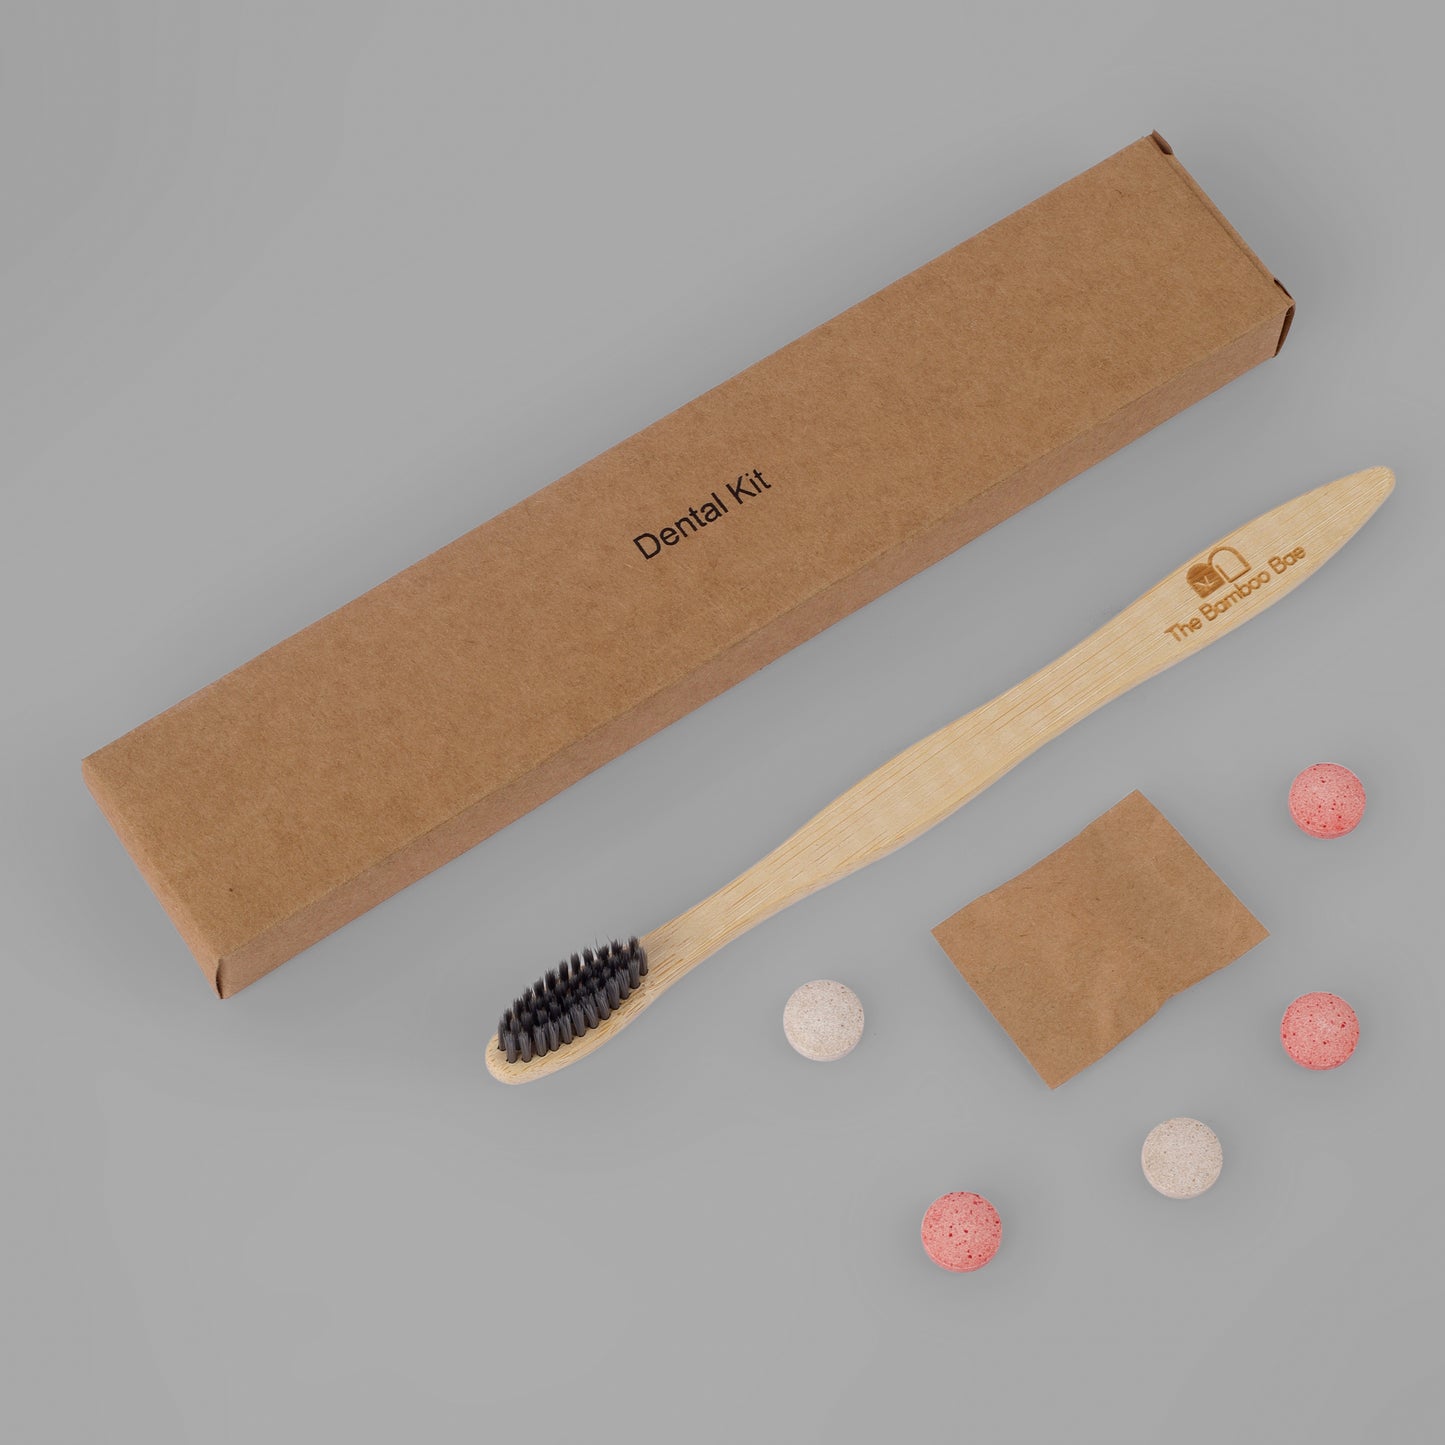 Bamboo Dental Kit For Hotels Hospitals Airlines | Wooden Toothbrush Kit